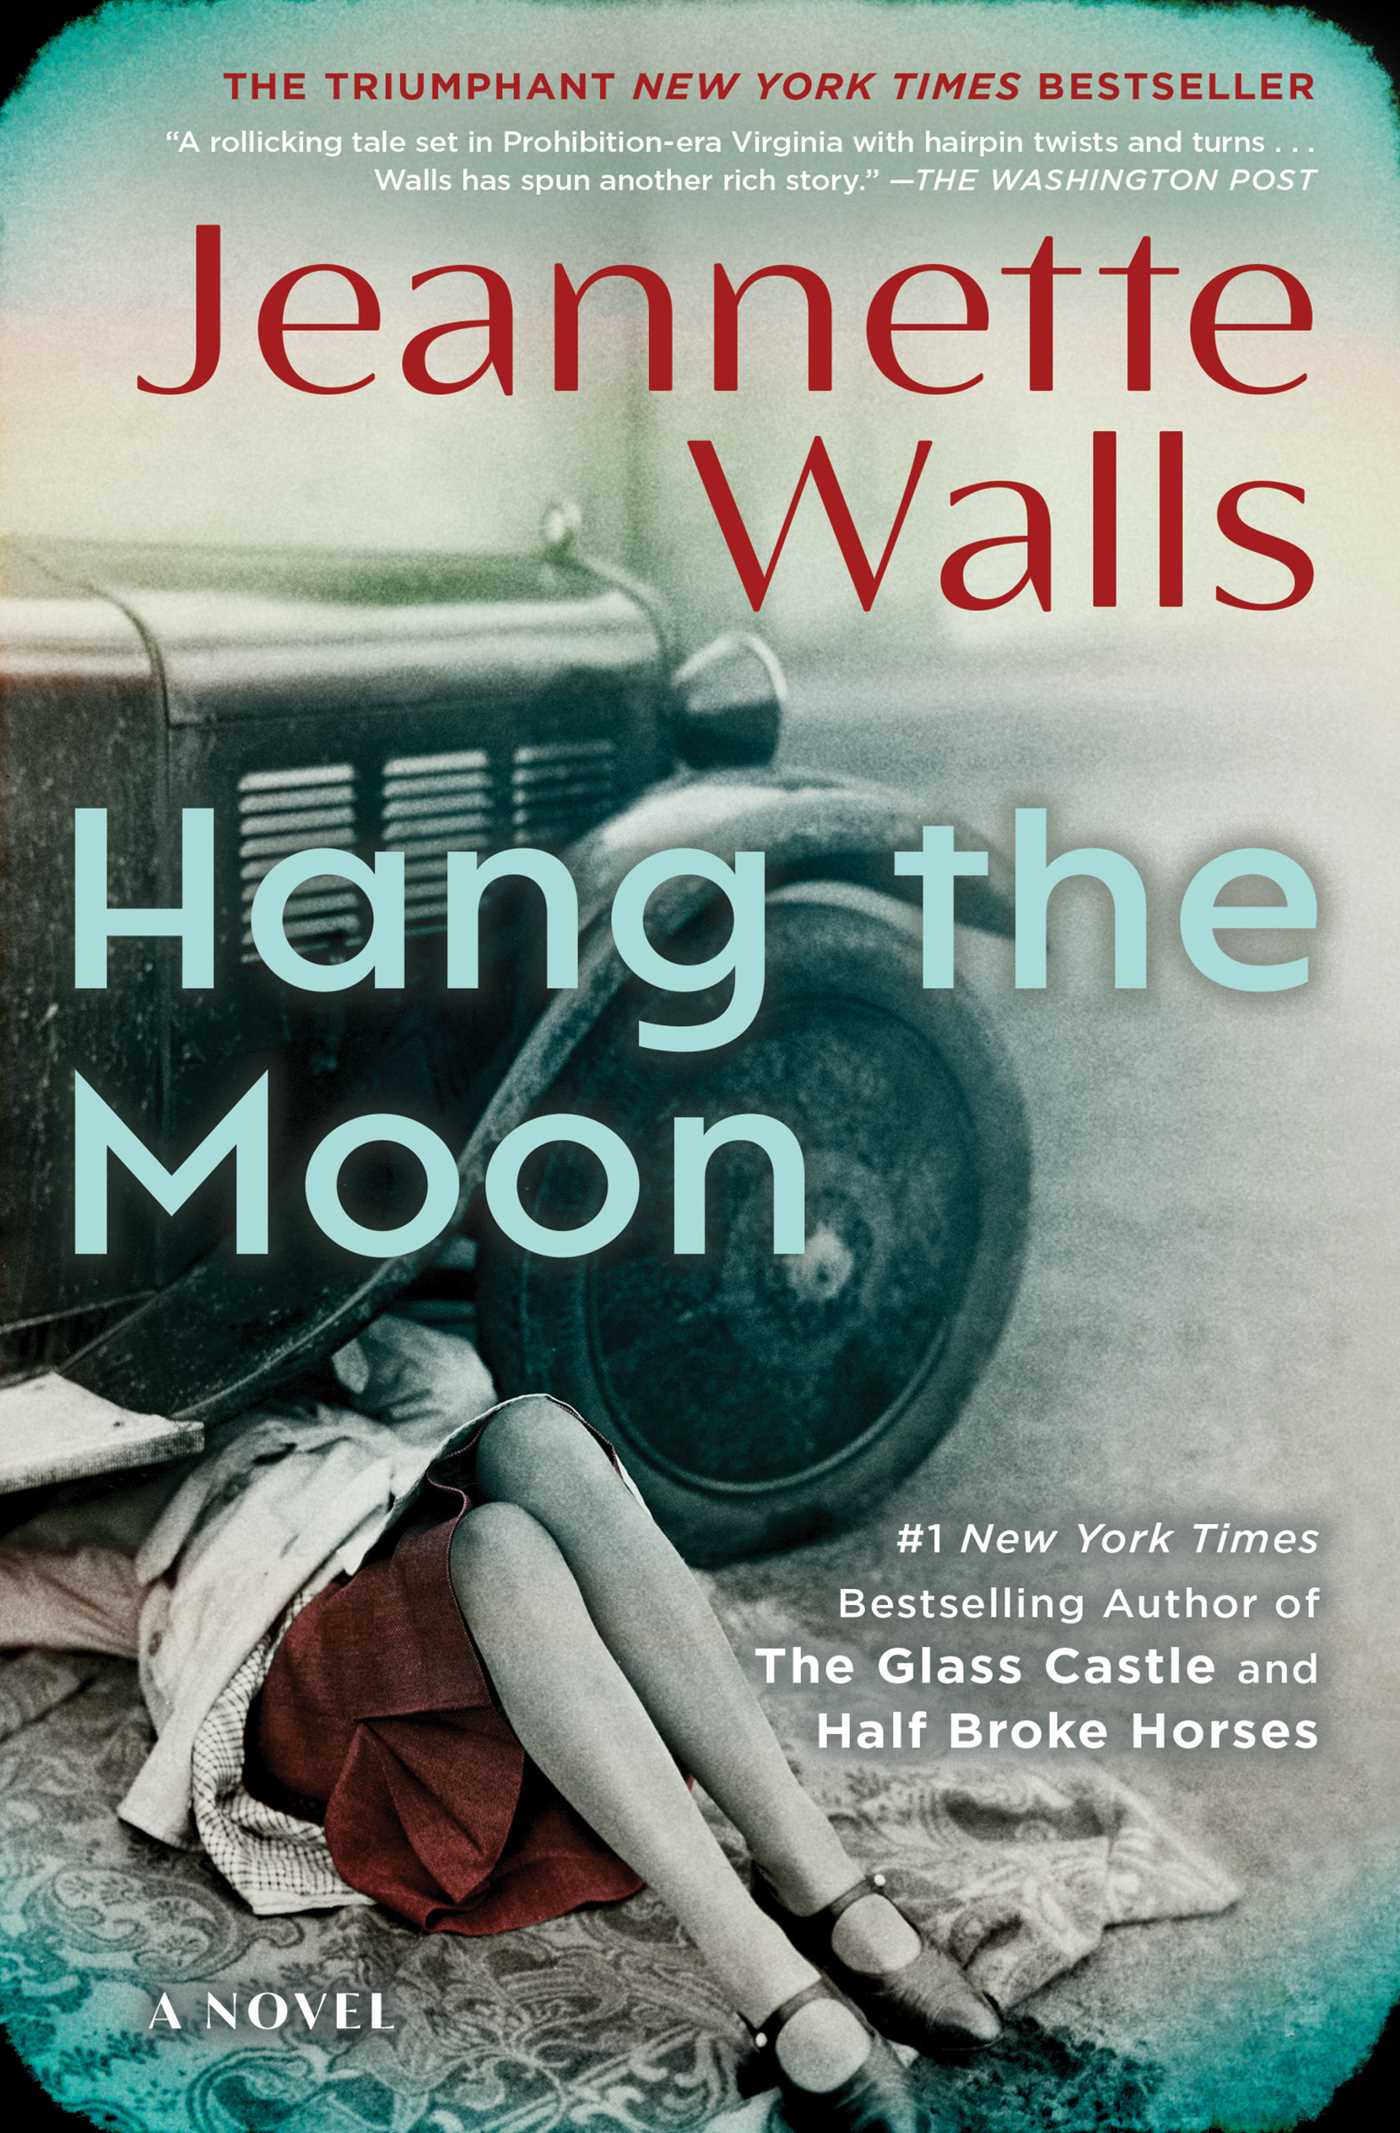 Hang the Moon cover image